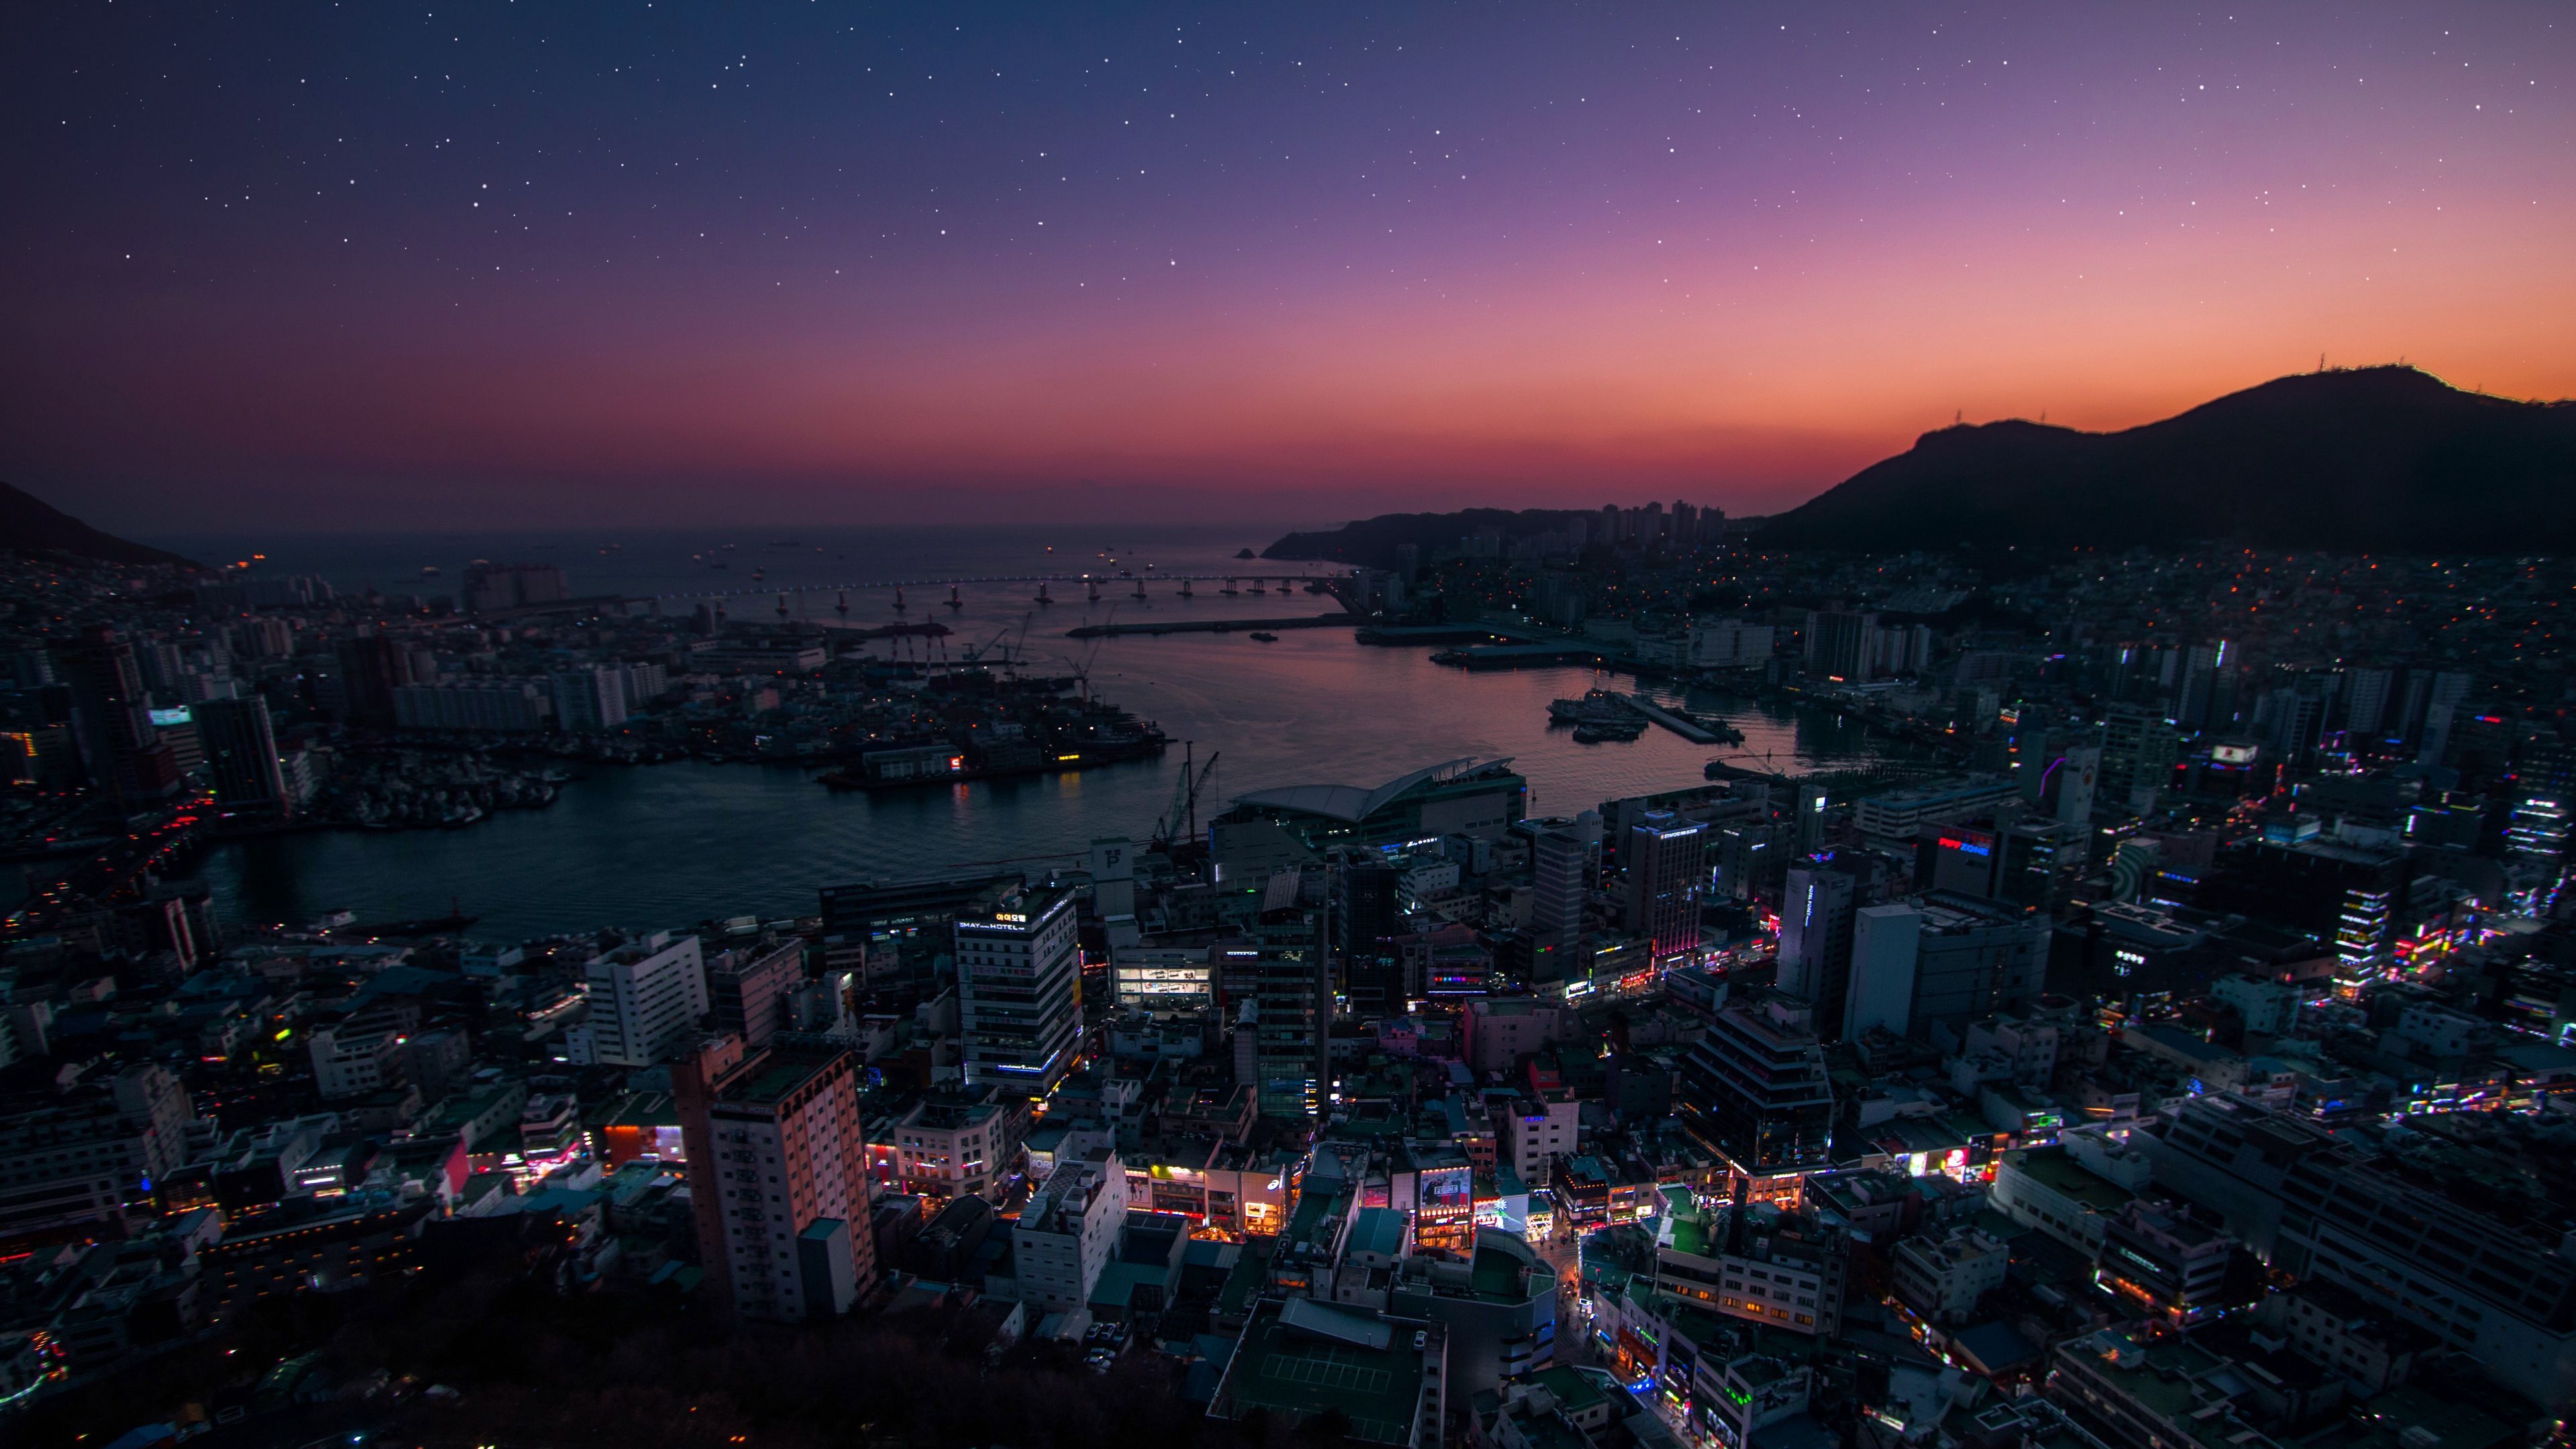 A city at night with the stars shining - Seoul